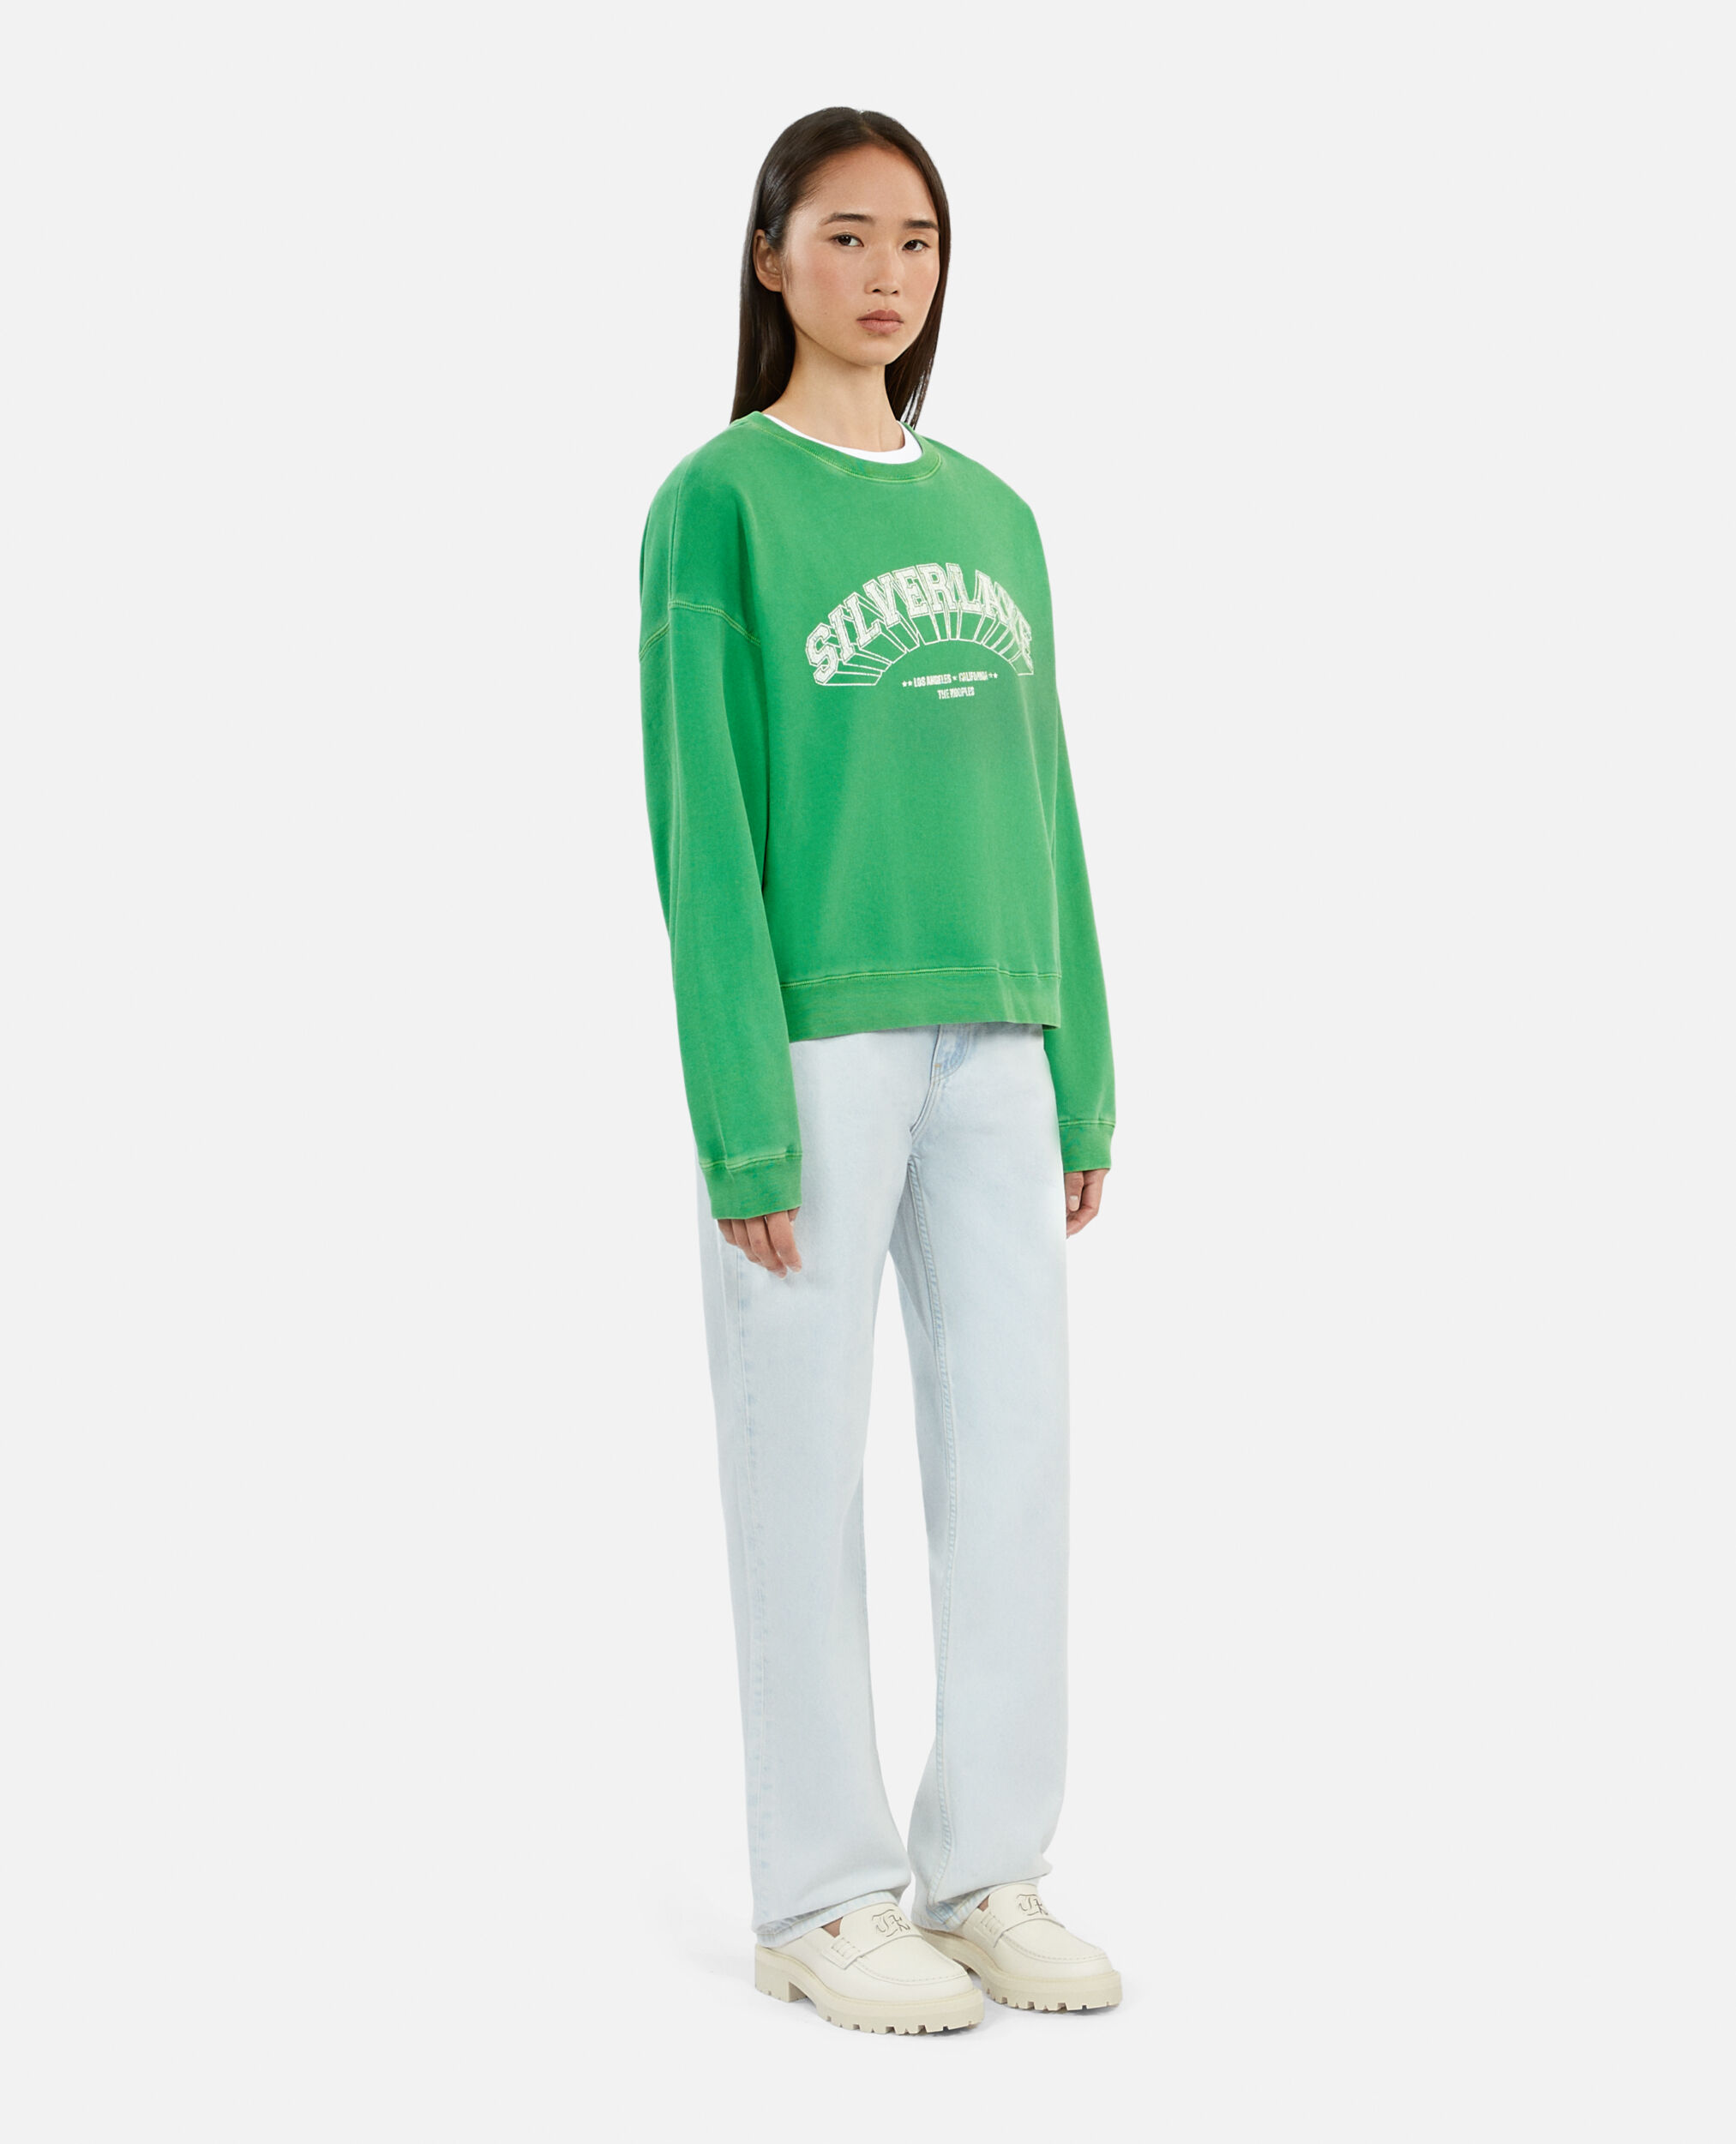 Green sweatshirt with Silverlake serigraphy, GREEN, hi-res image number null